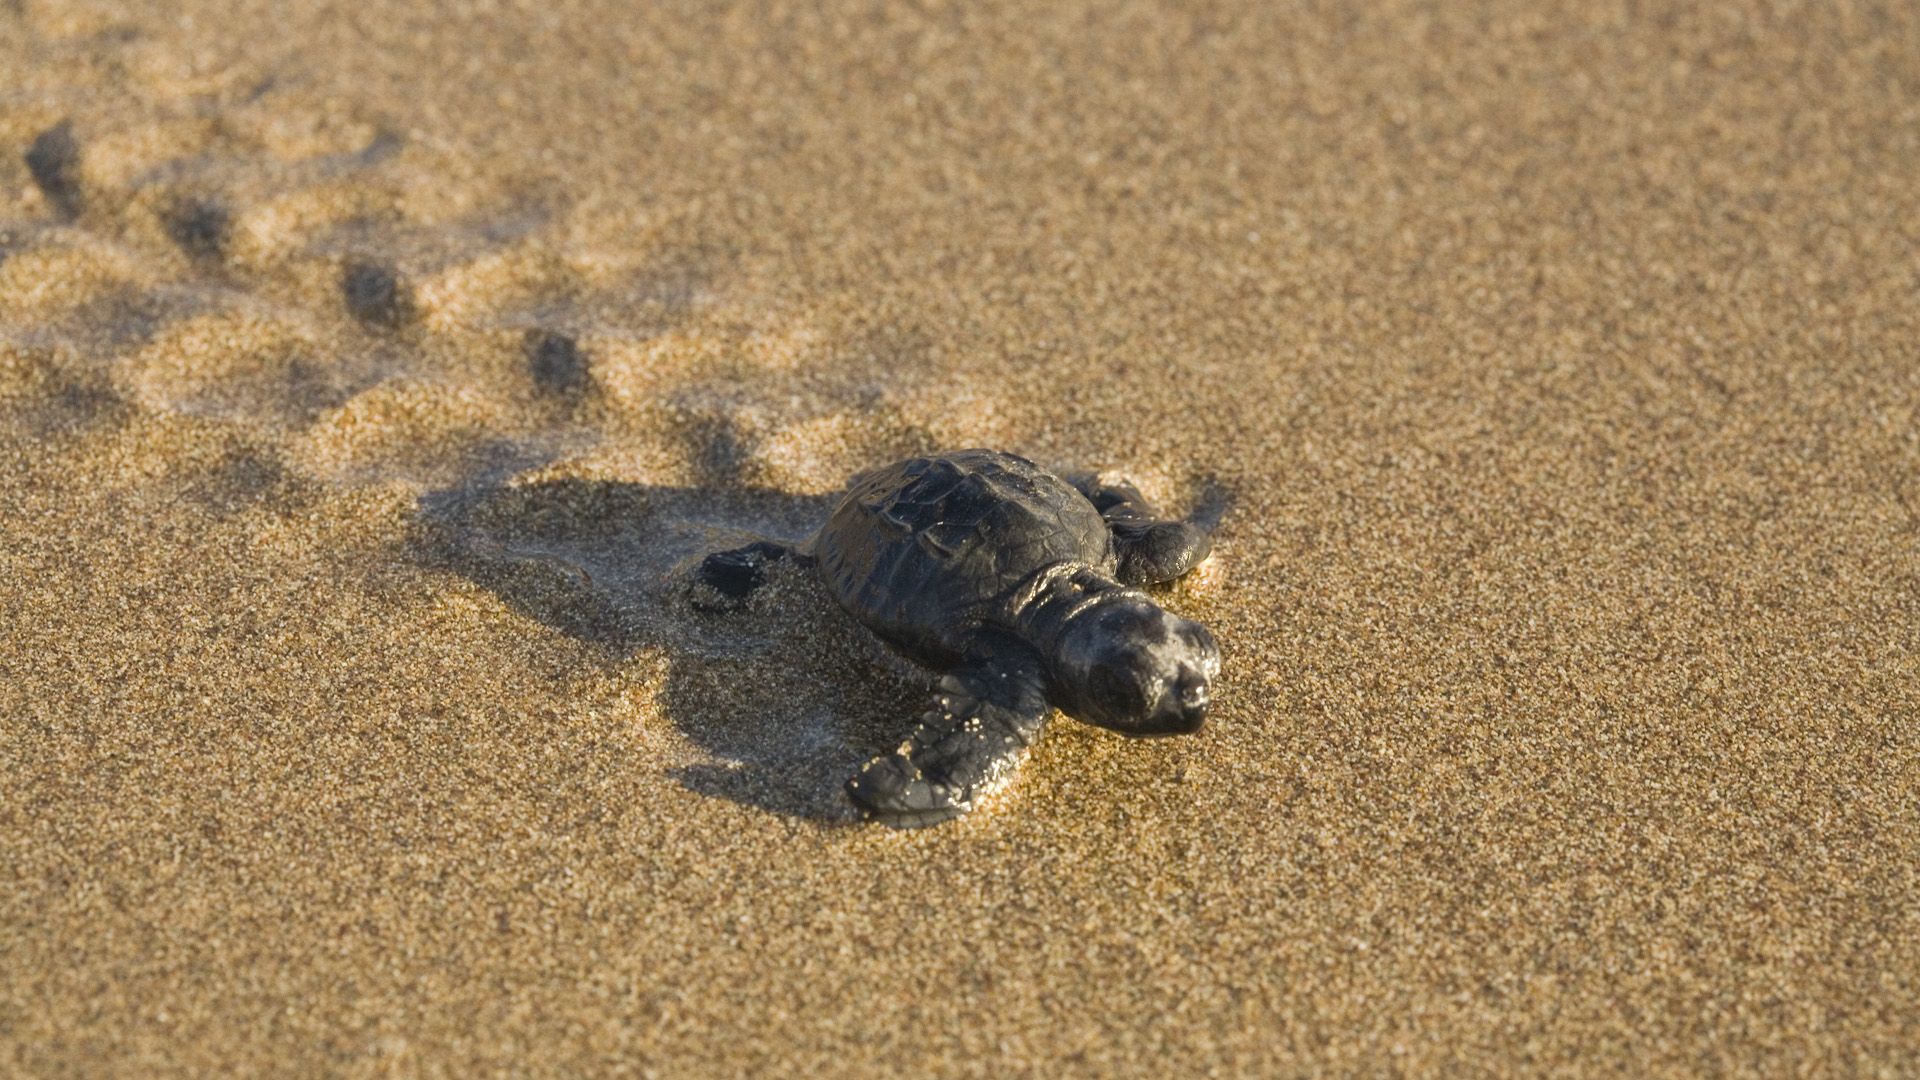 A baby turtle crawling on the sand - Turtle